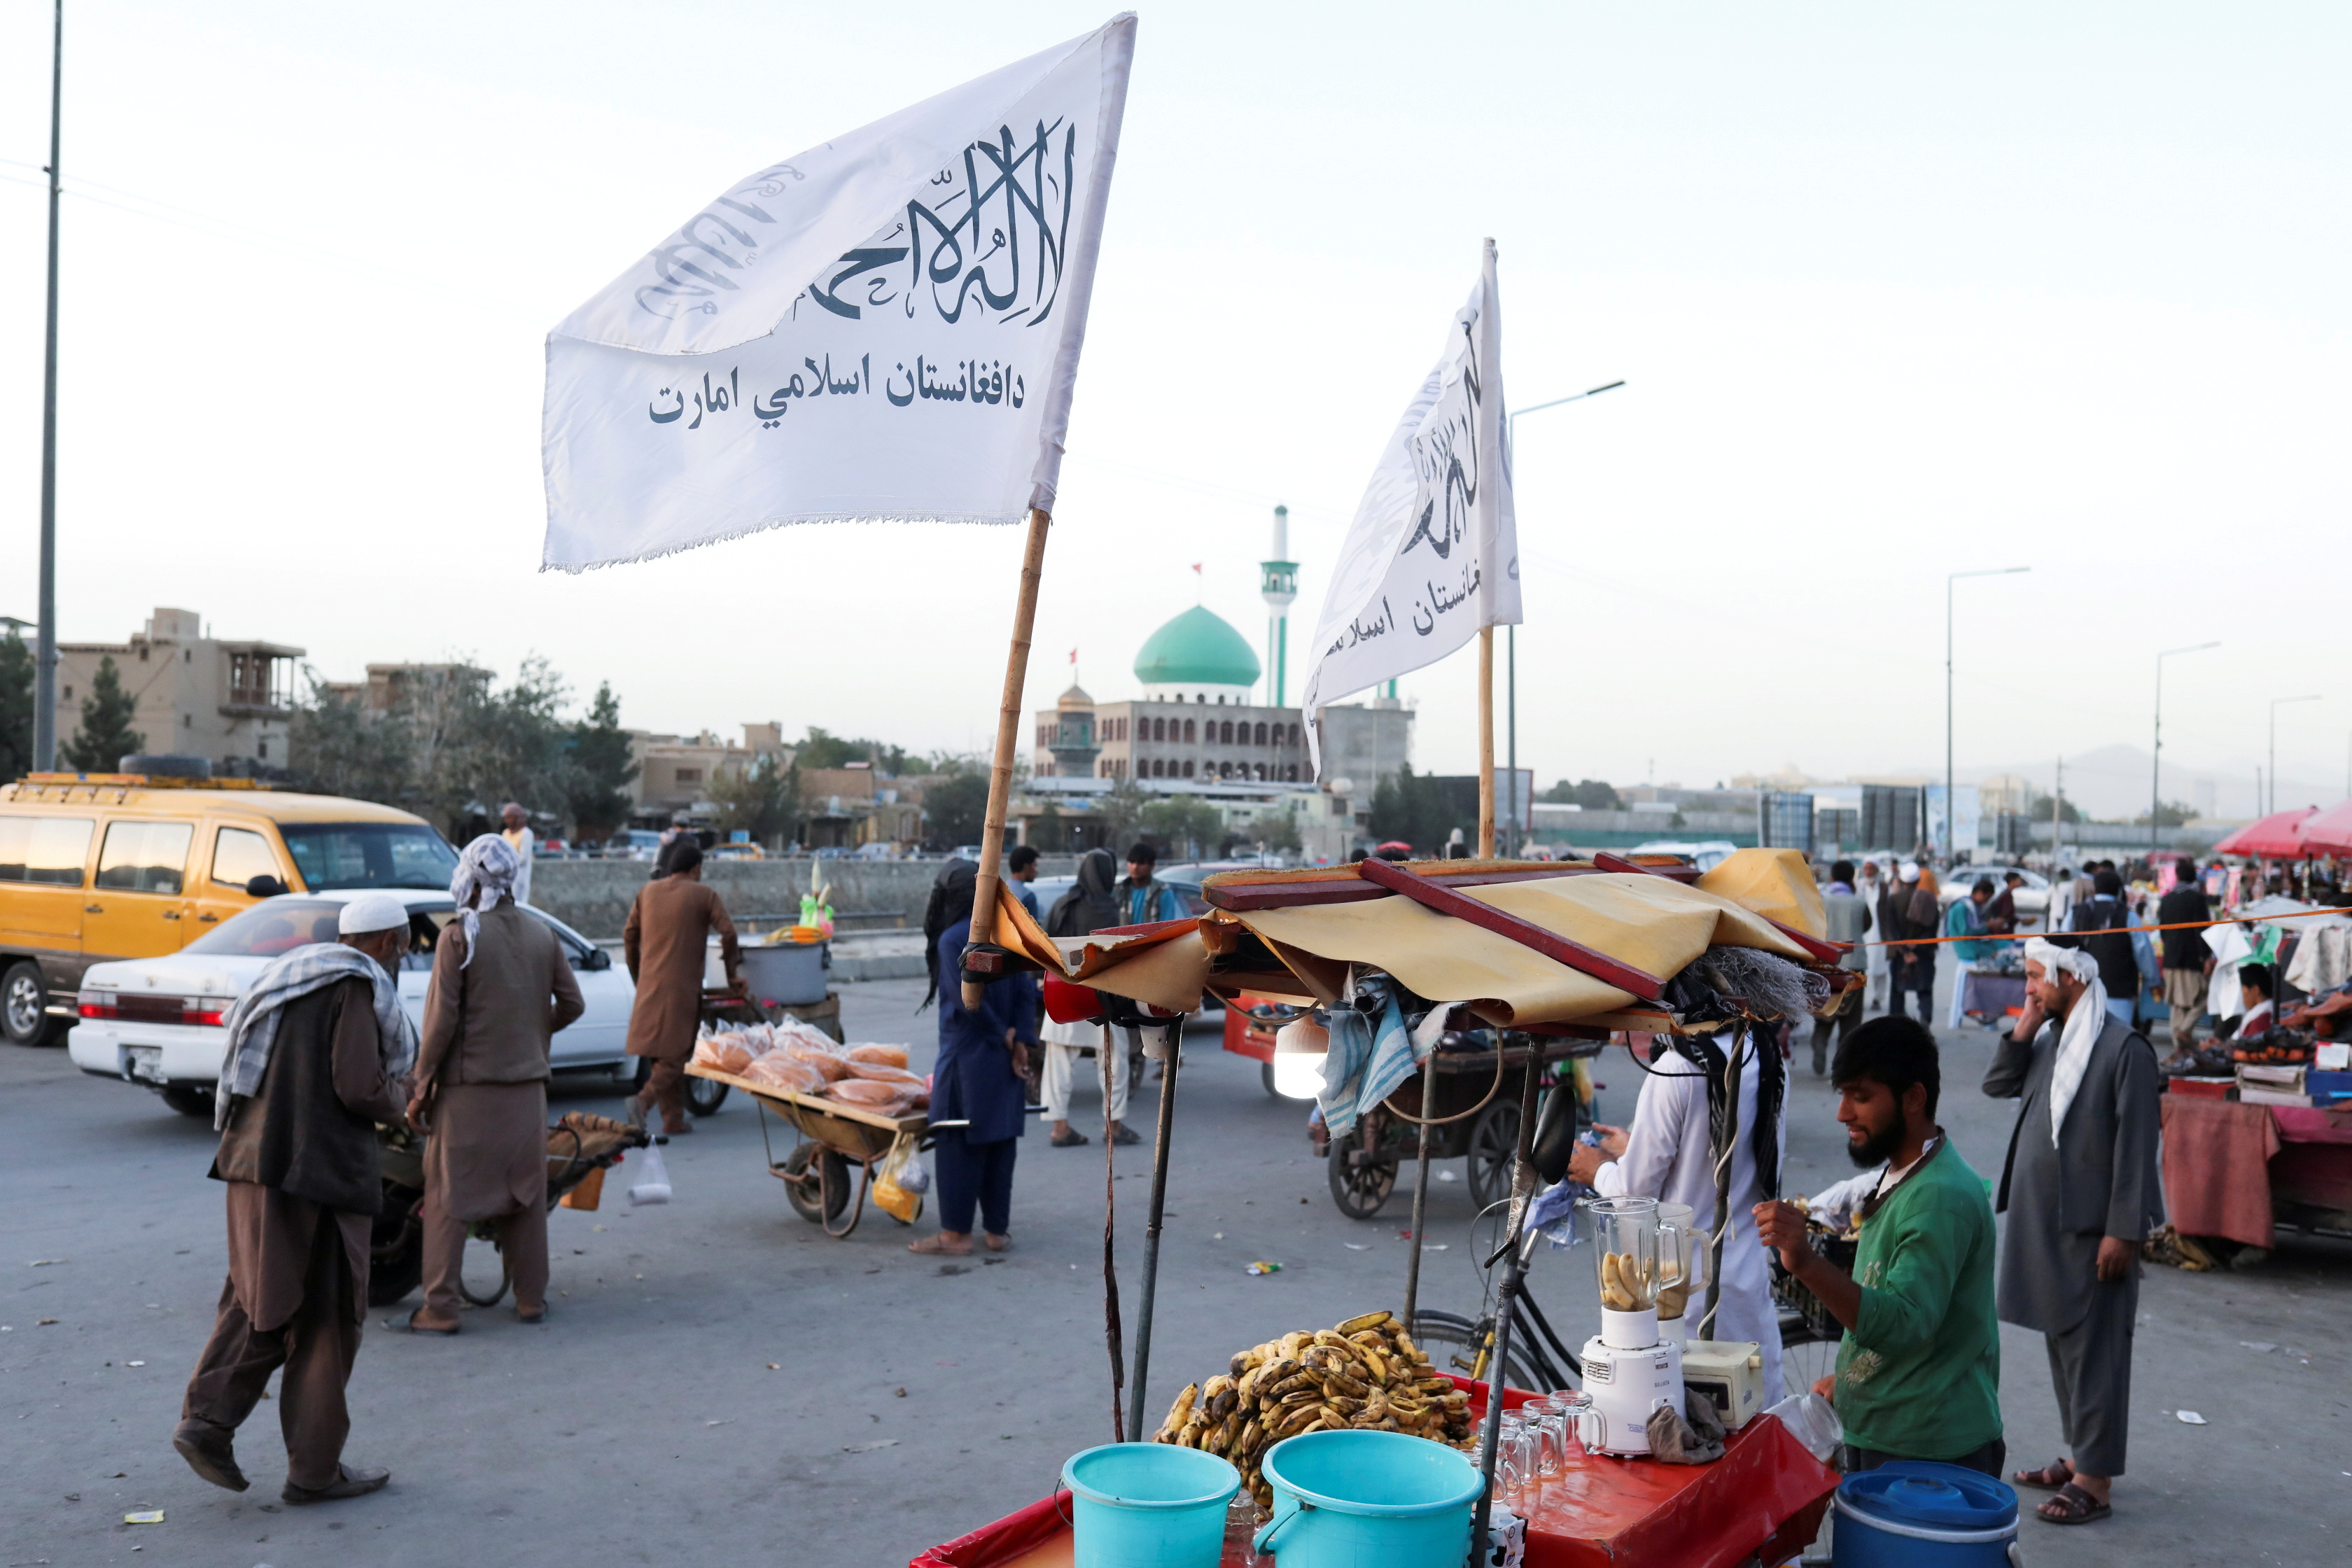 The Taliban flags are seen on a street in Kabul